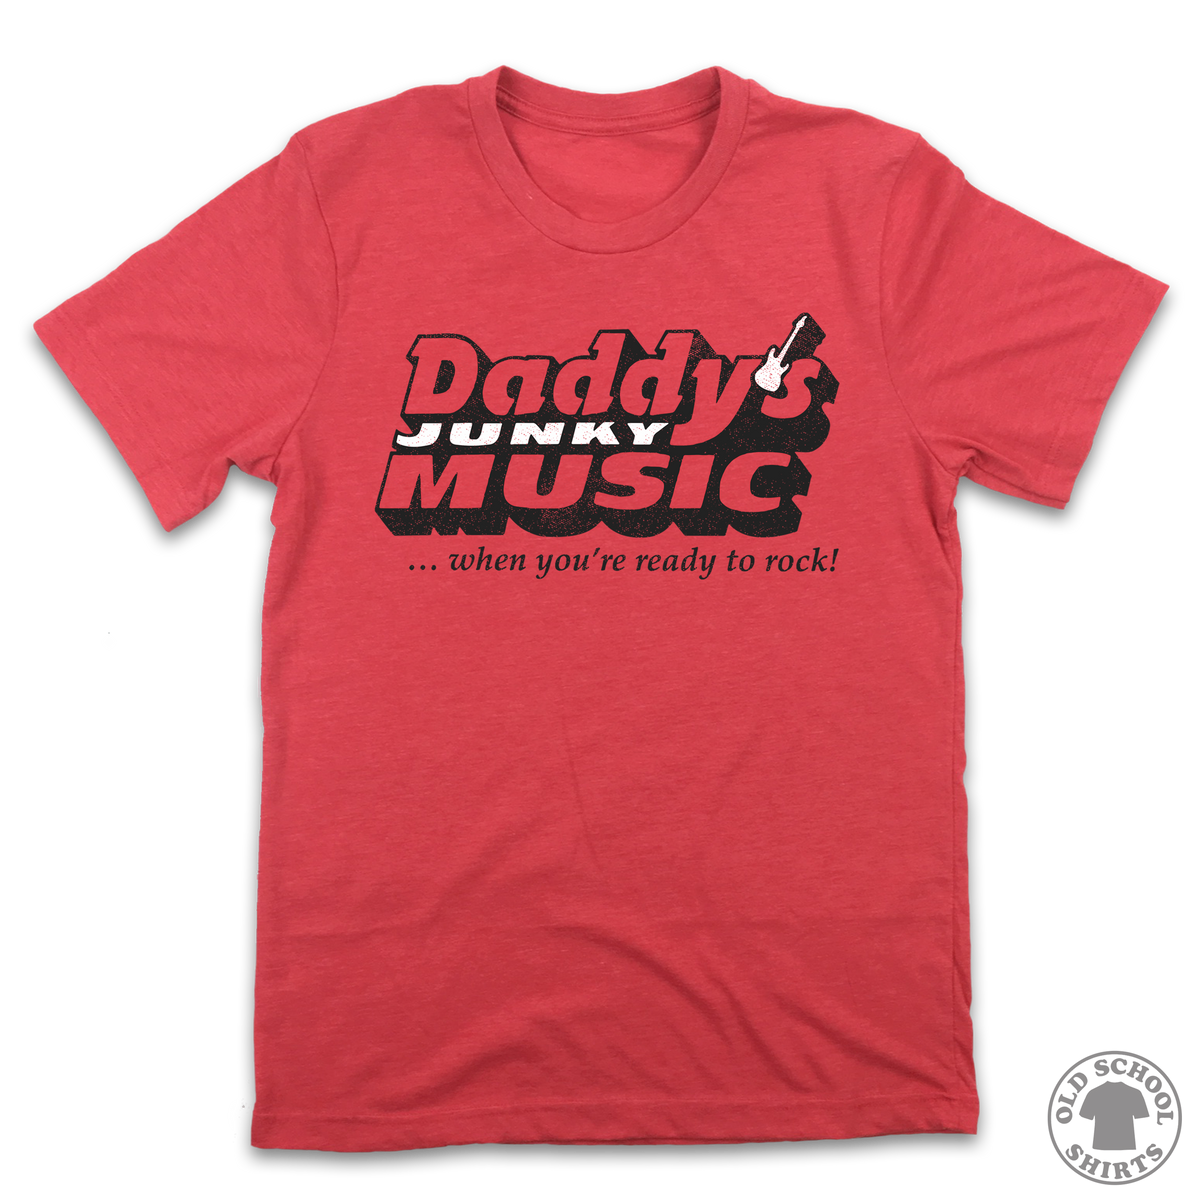 Daddy's Junky Music - Old School Shirts- Retro Sports T Shirts